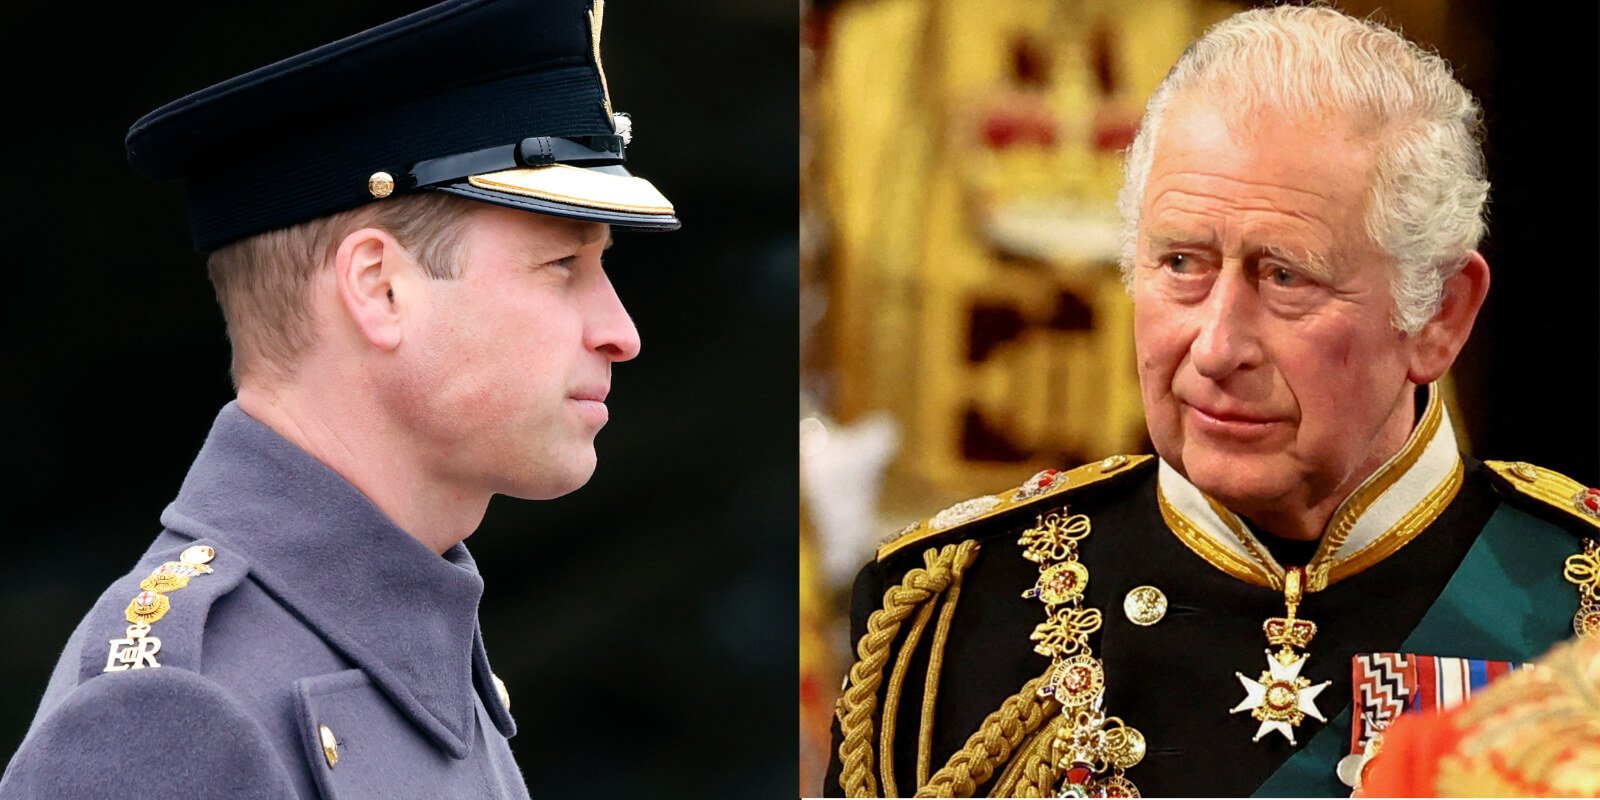 Prince William and his father King Charles in side by side photographs.